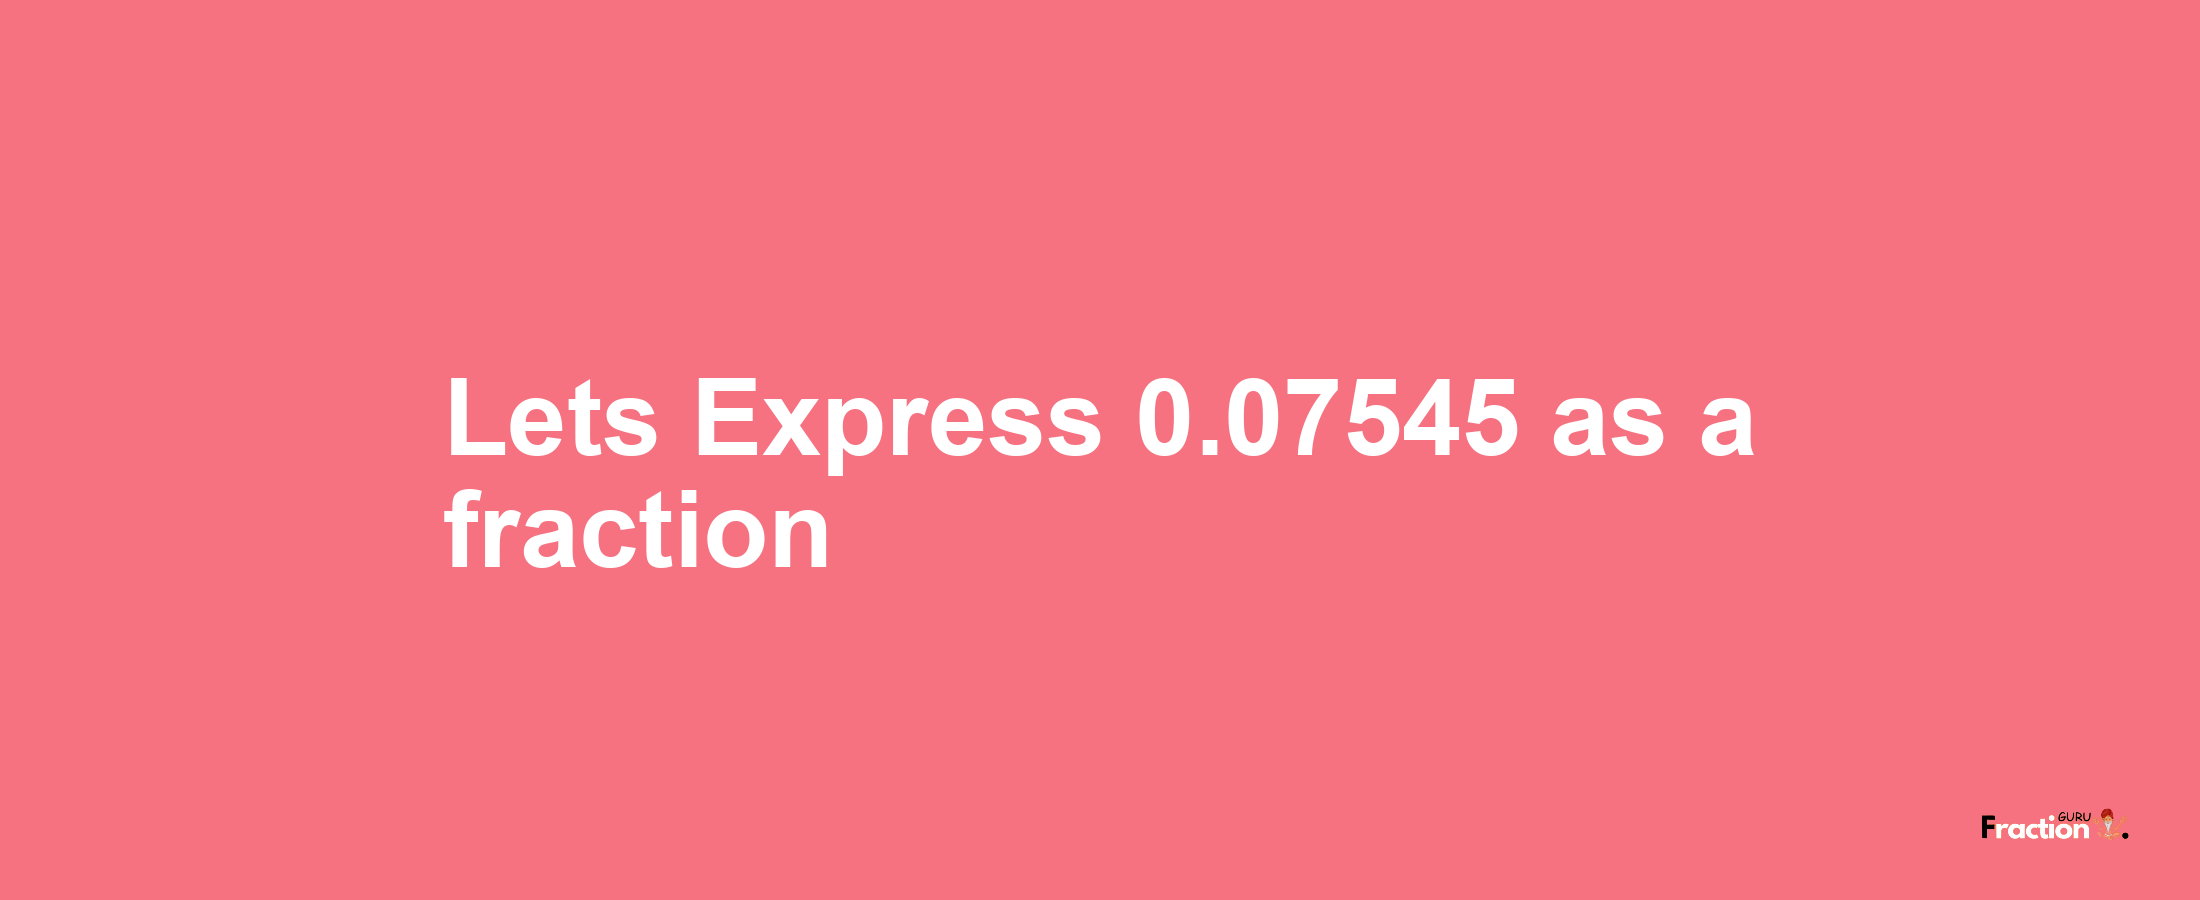 Lets Express 0.07545 as afraction